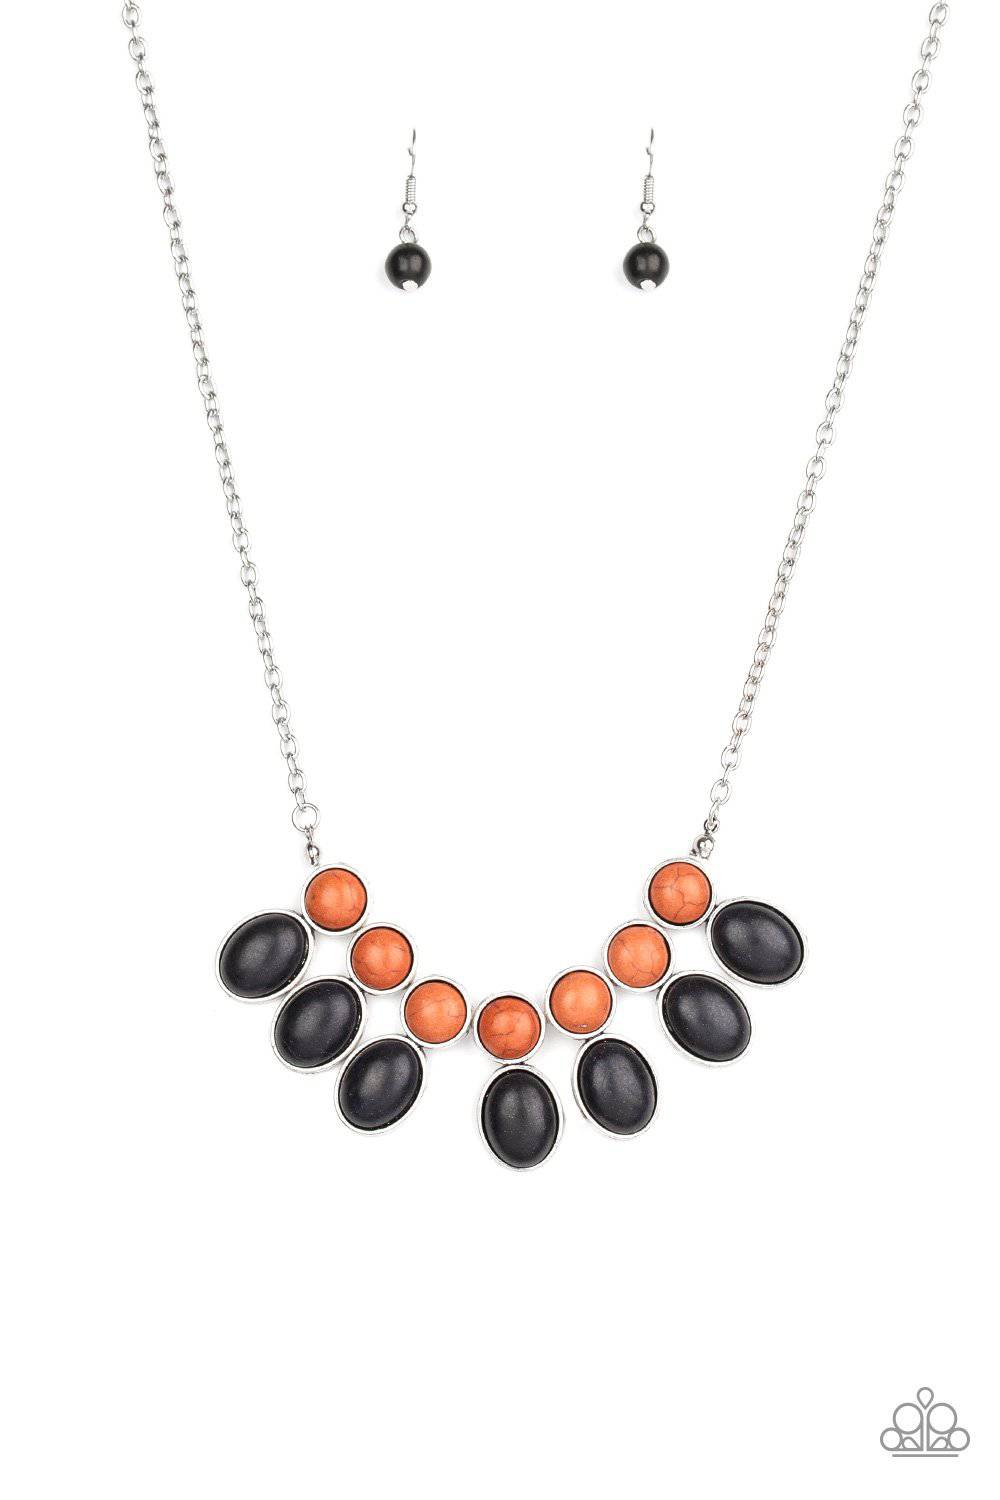 A73 - Environmental Impact Black Necklace by Paparazzi Accessories on Fancy5Fashion.com